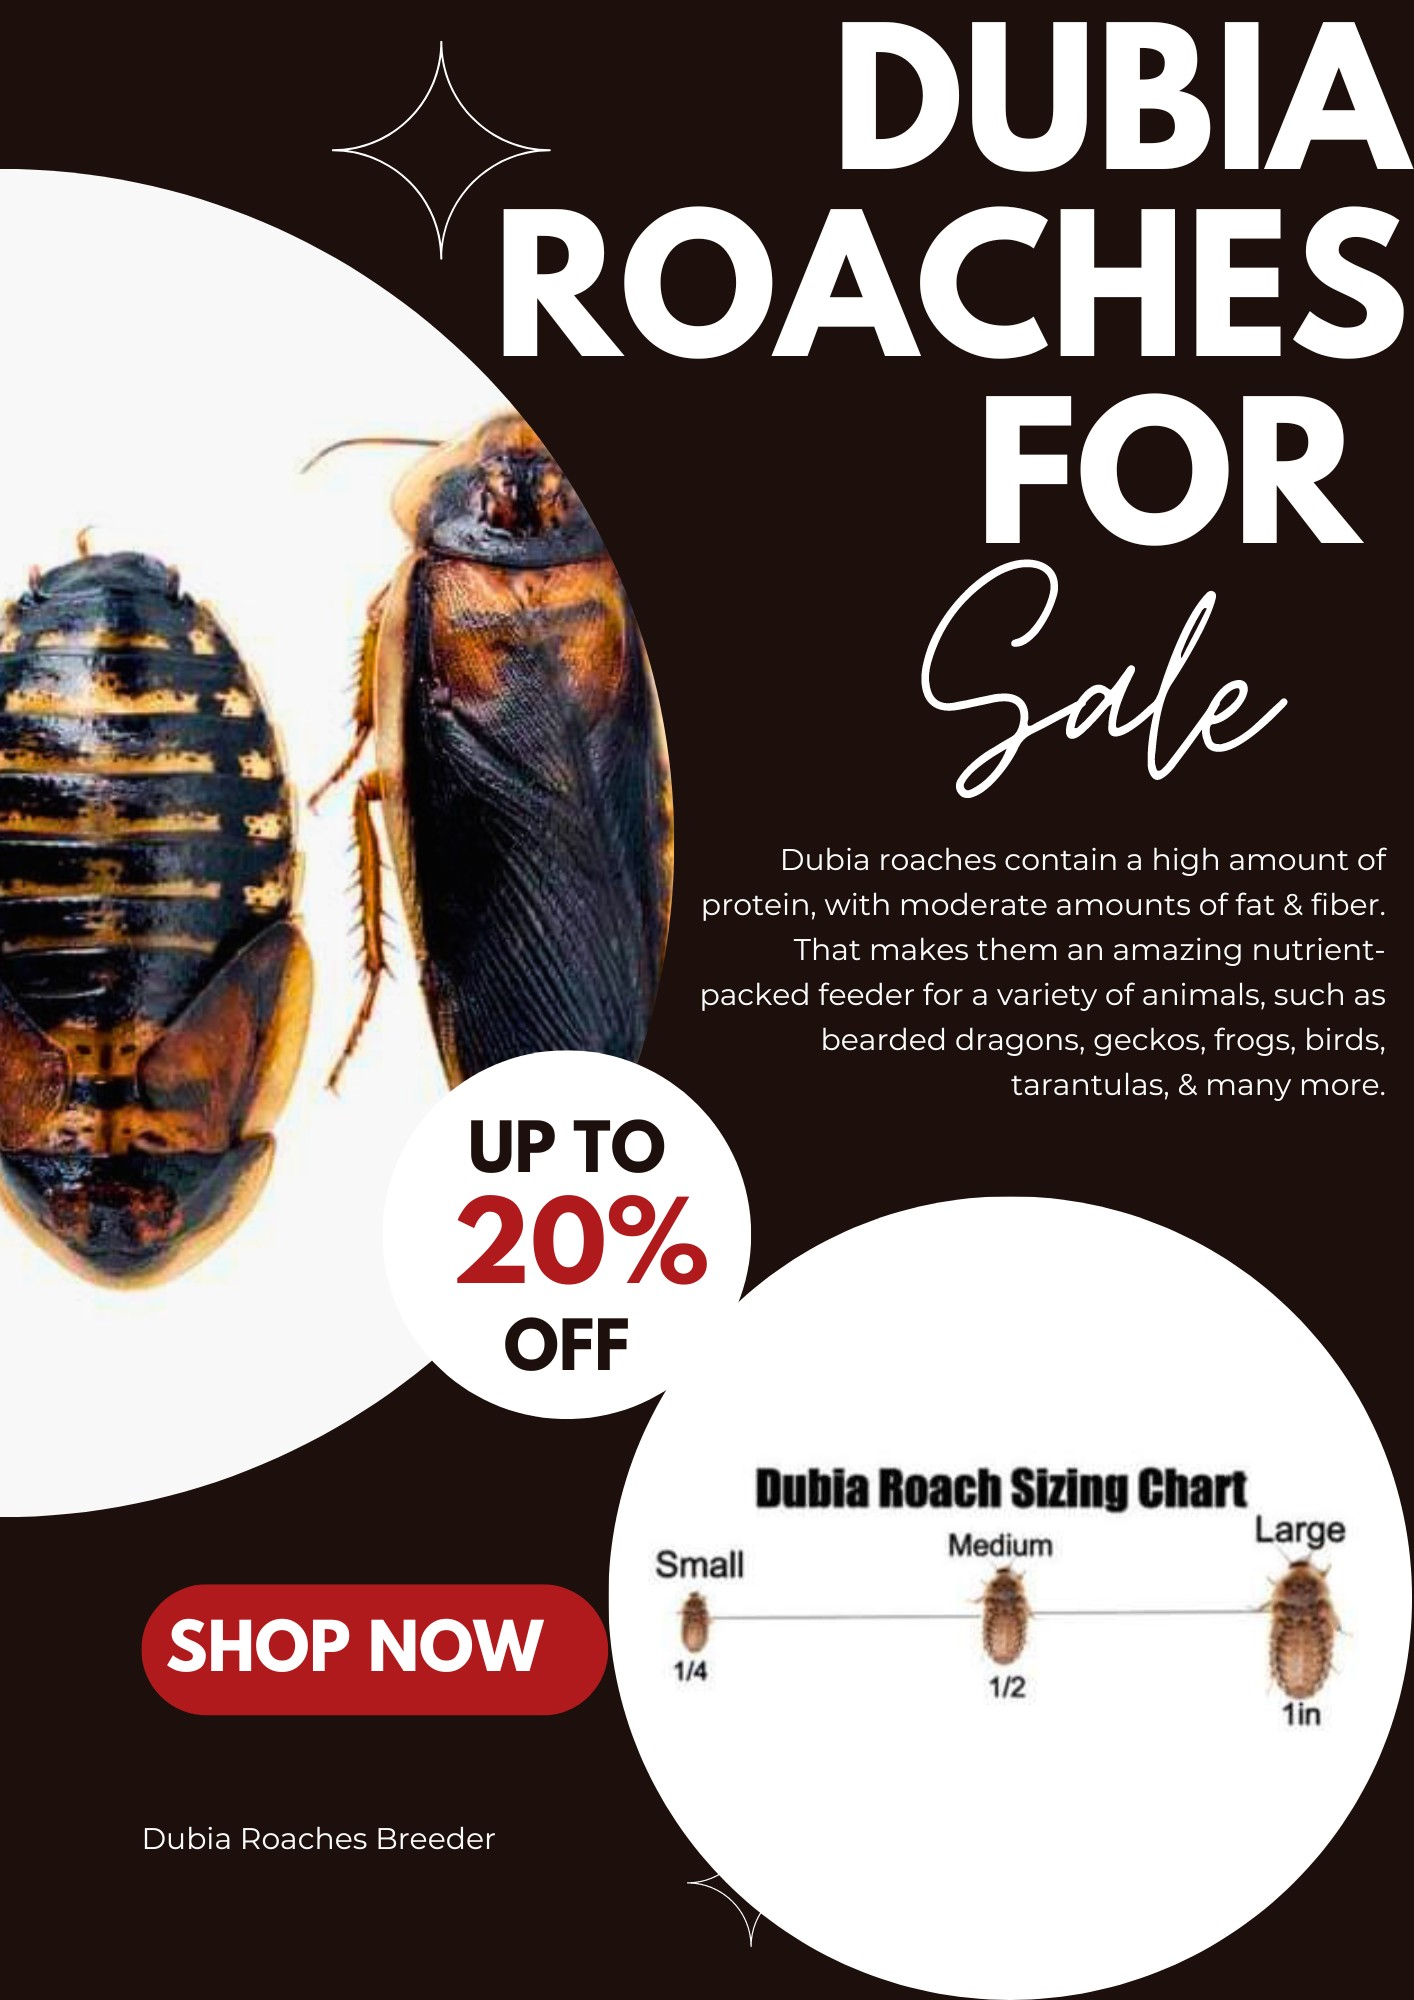 Dubia Roaches for sale 